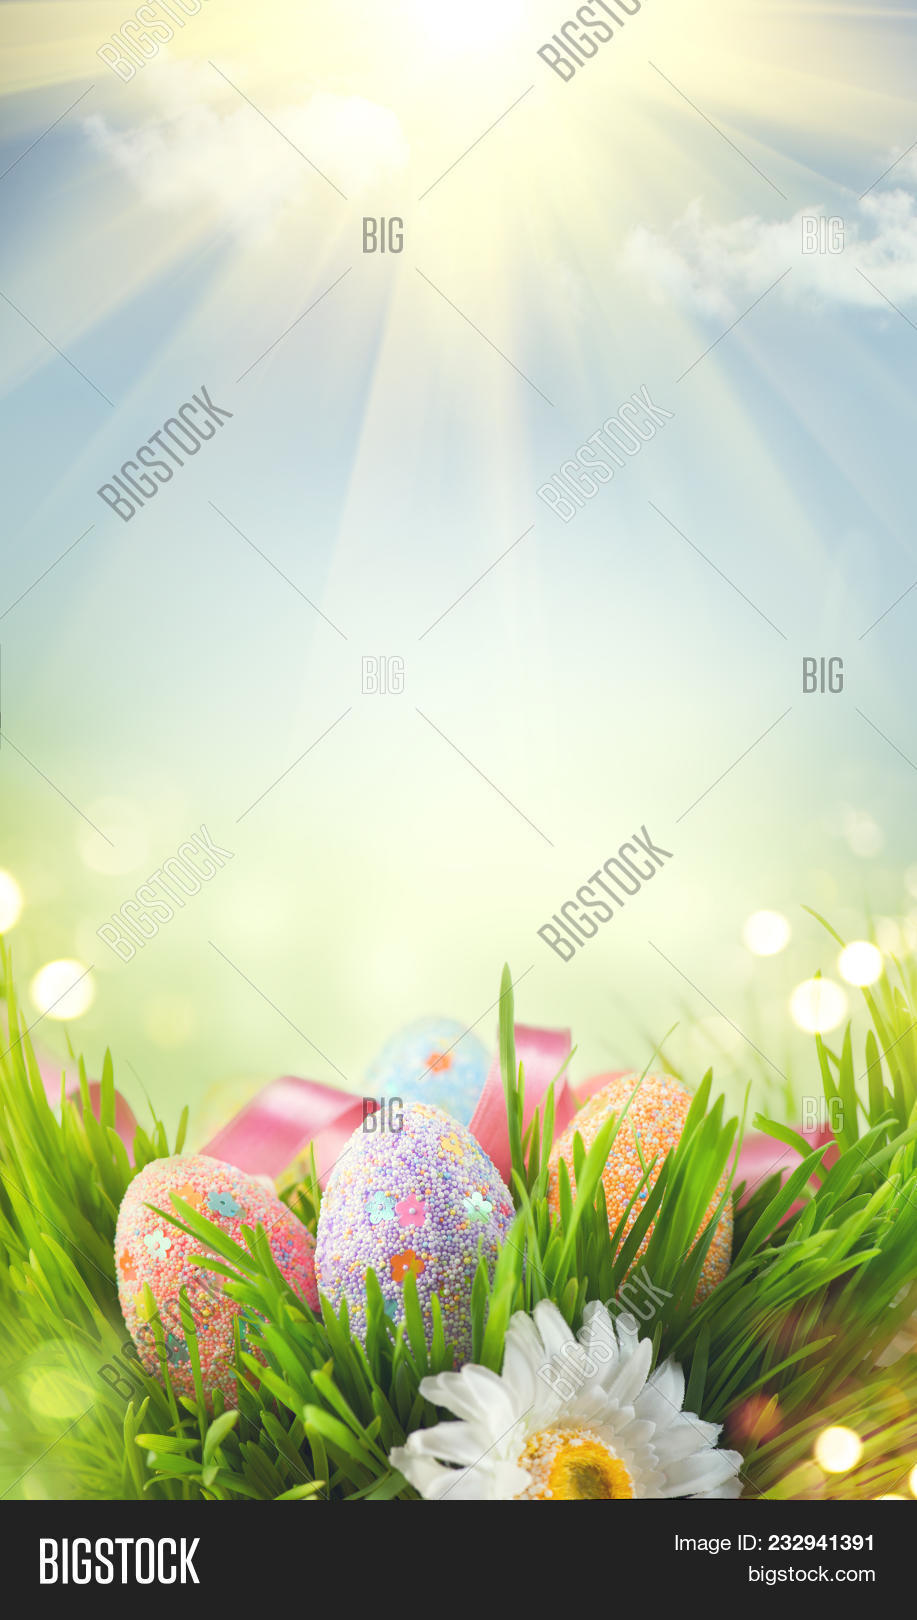 Easter eggs background image photo free trial bigstock